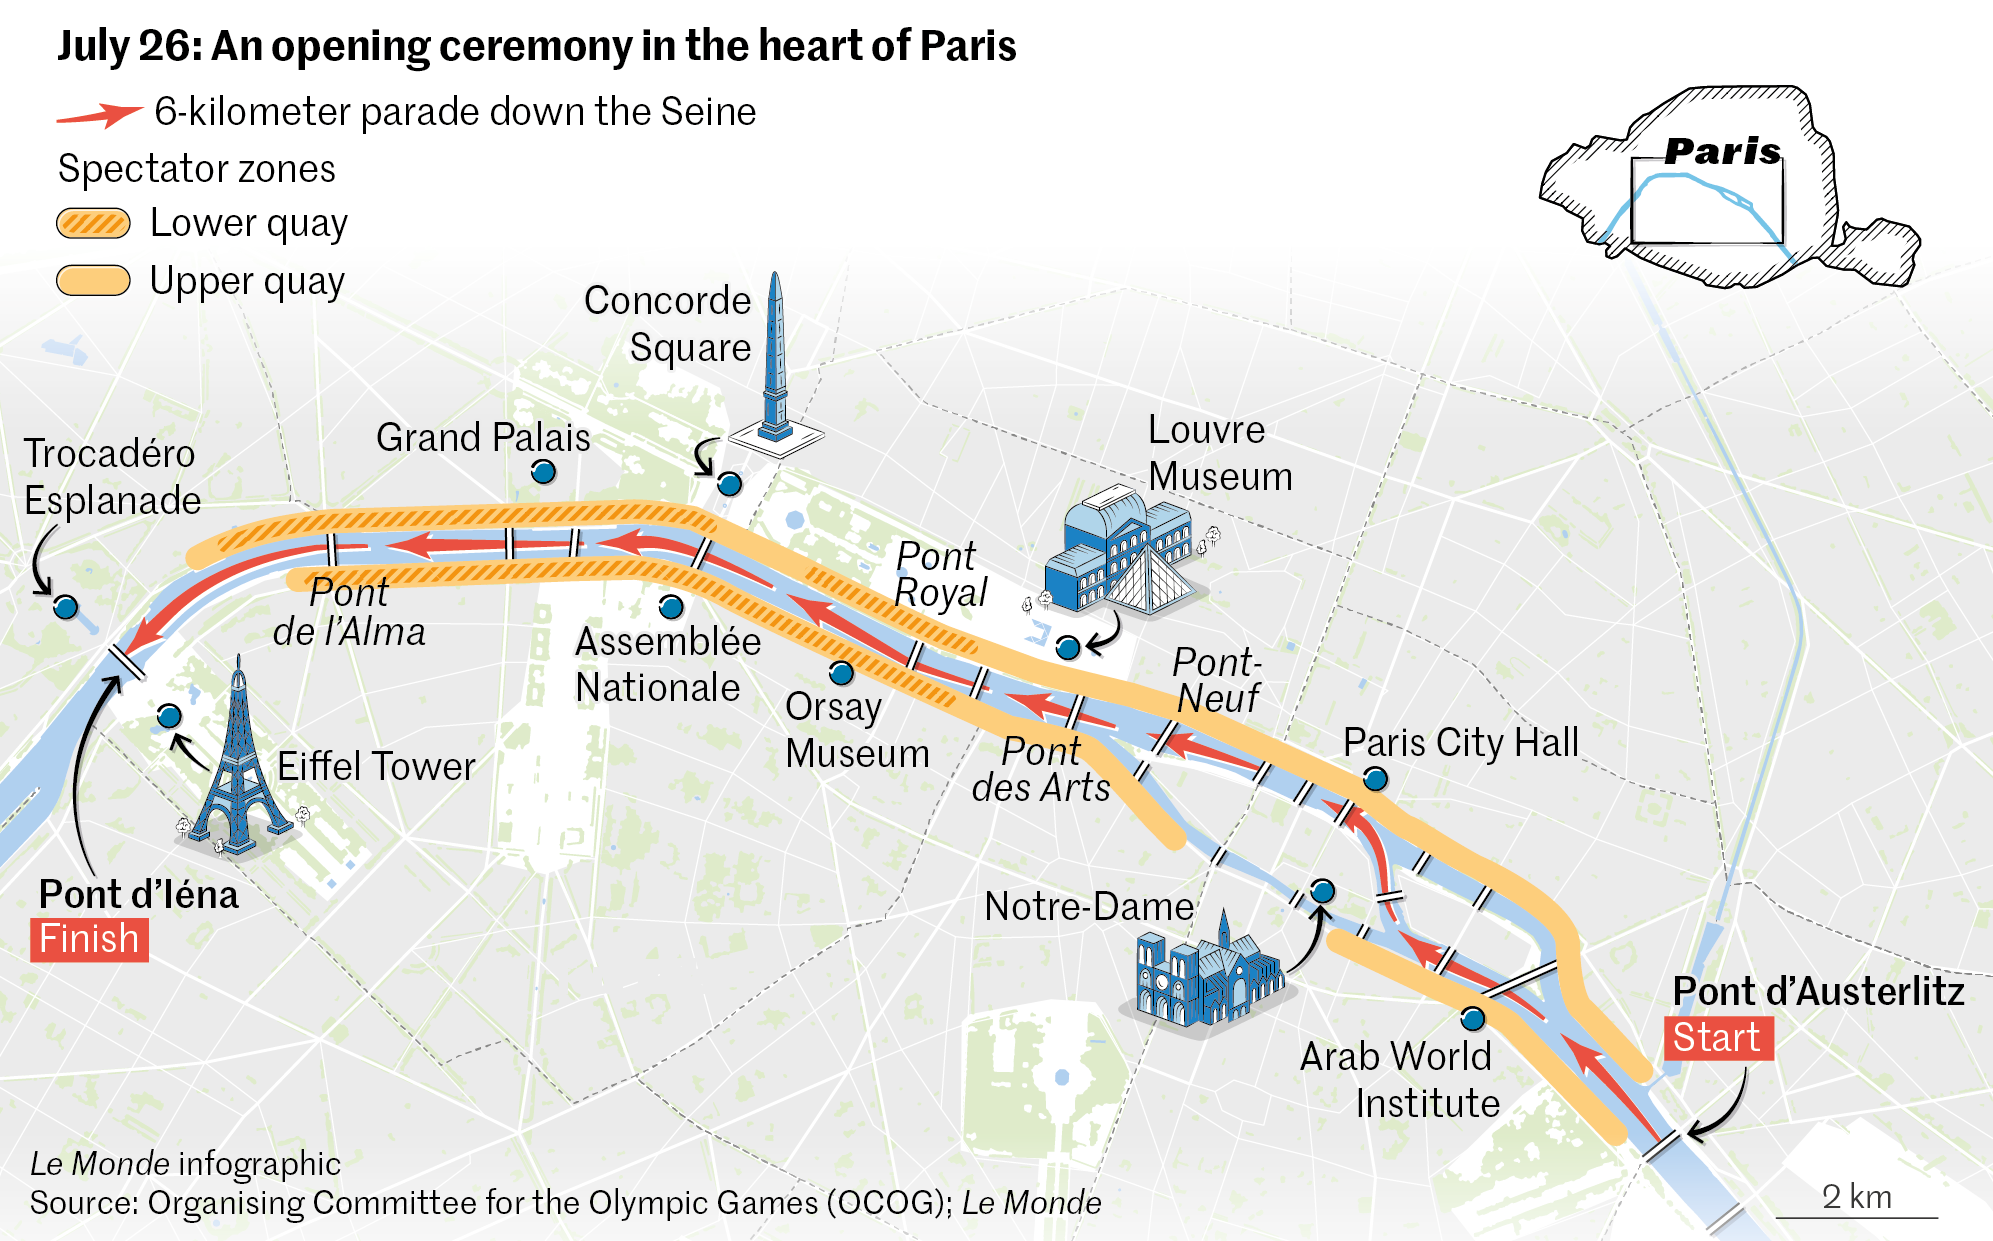 Le Monde Infographic. Source: Organising Committee for the Olympic Games (OCOG); Le Monde (Image obtained at www.lemonde.fr)